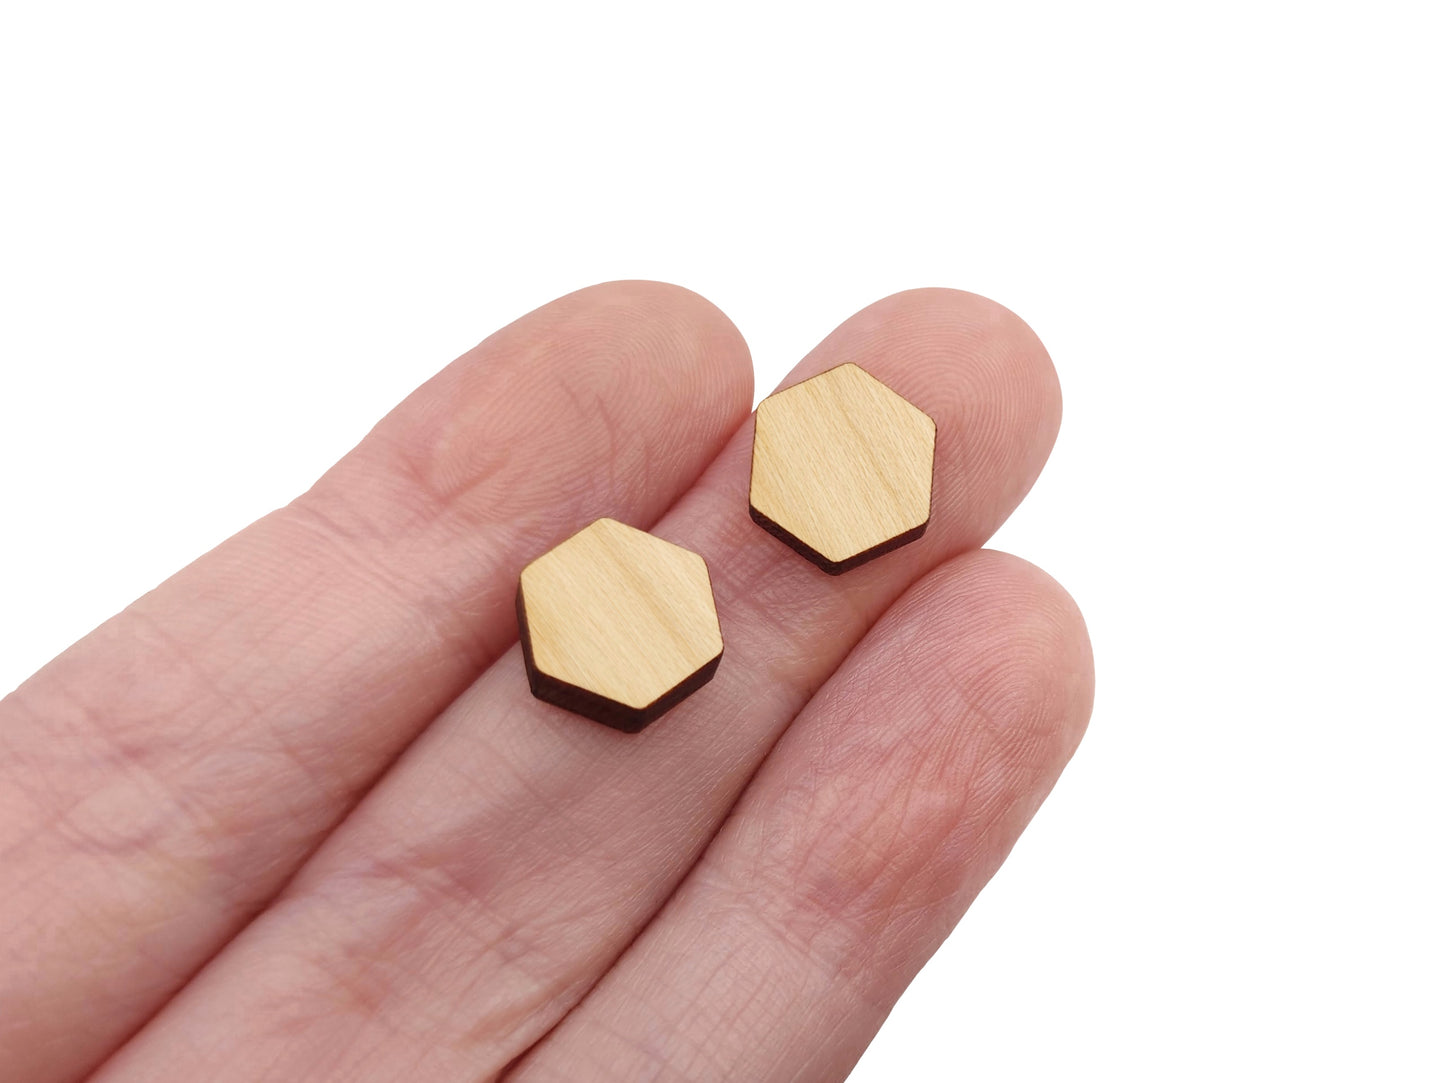 A hand holding a pair of wood and acrylic cabochon earring blanks cut in the shape of a hexagon